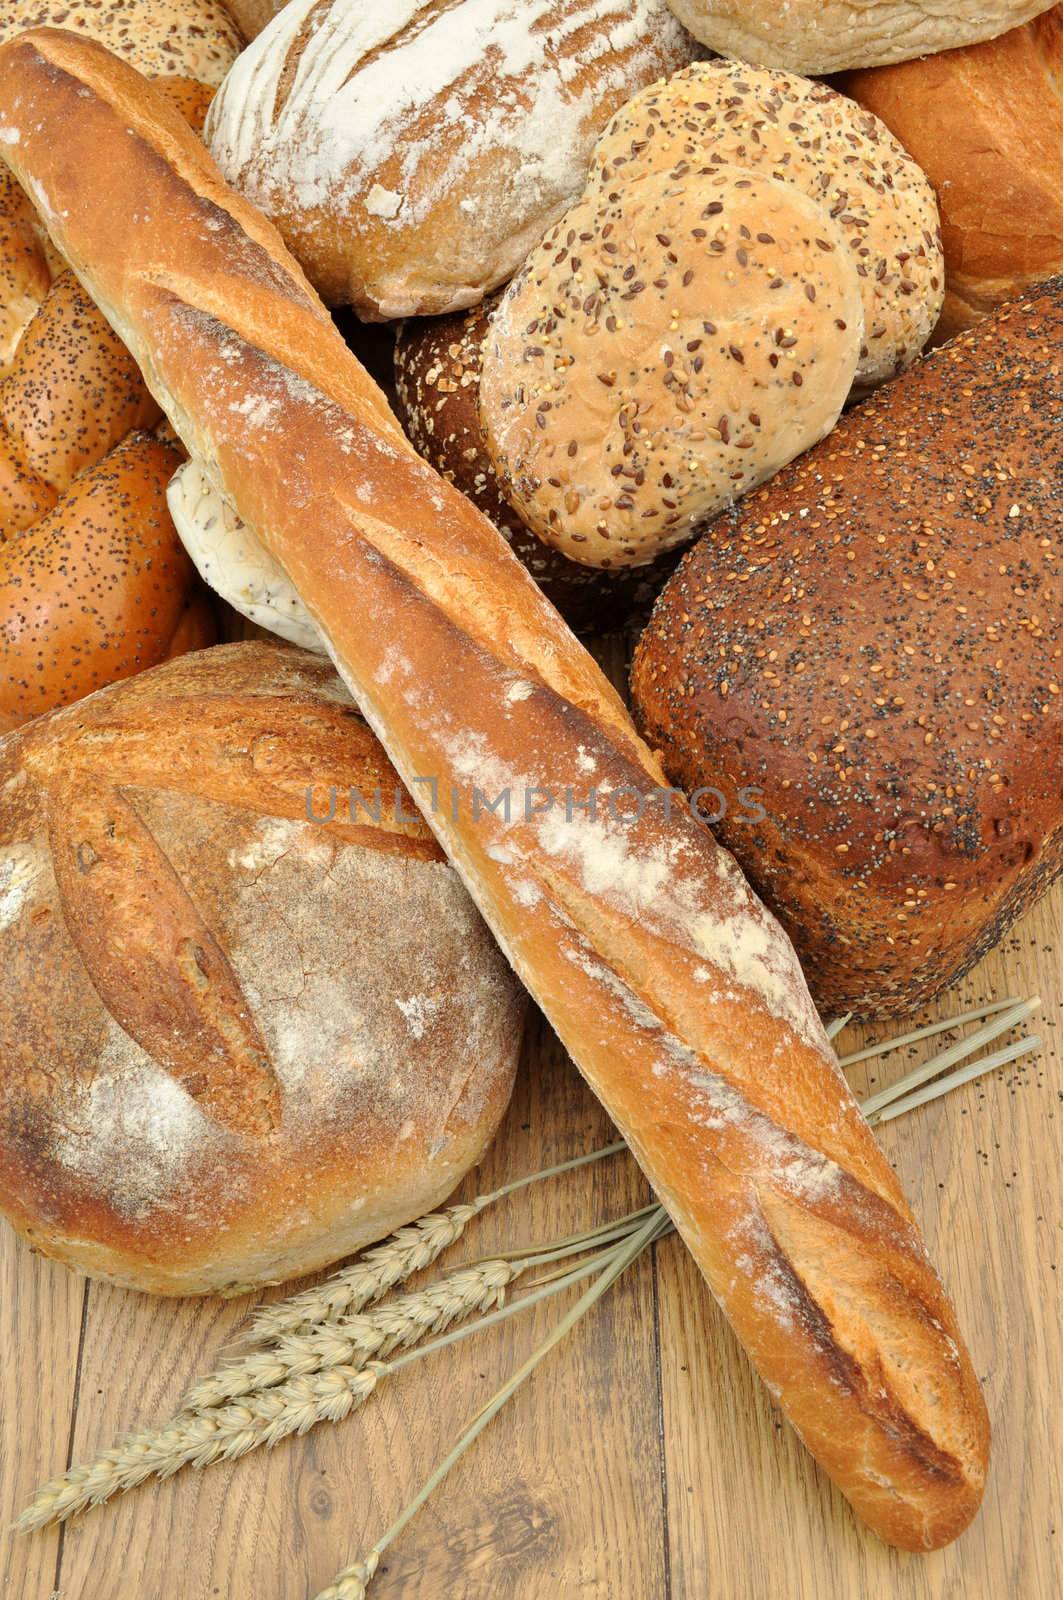 Bakery bread loaves and baguettes with wheat spikes